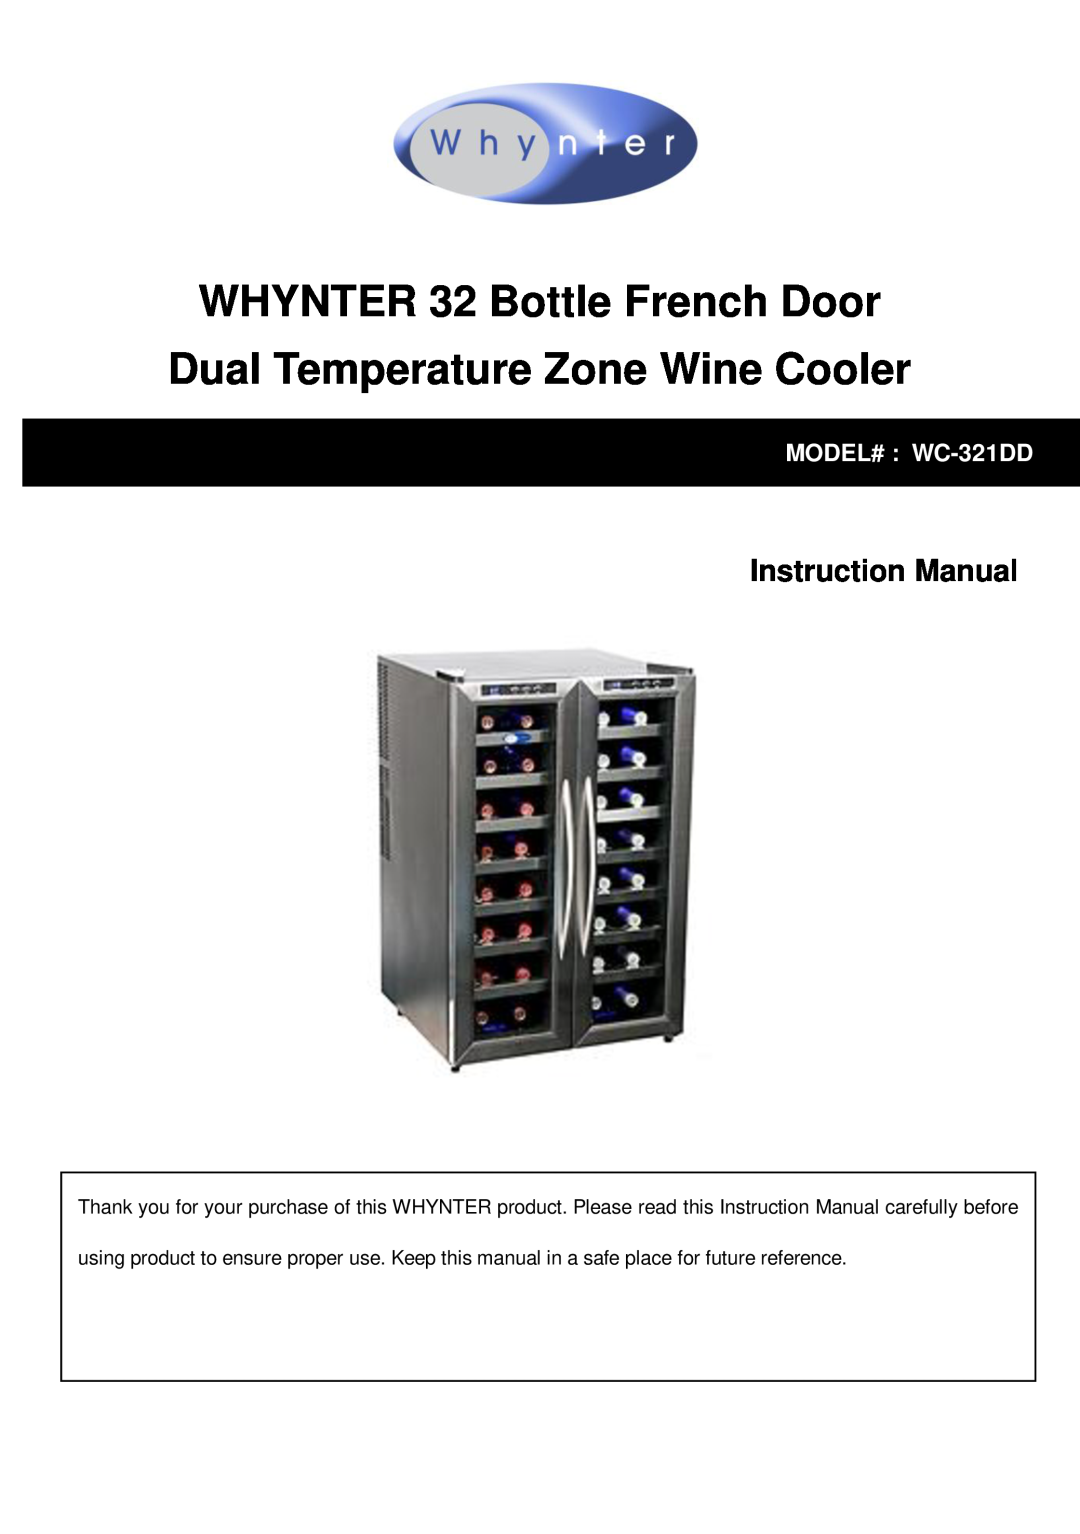 Whynter instruction manual WHYNTER 32 Bottle French Door Dual Temperature Zone Wine Cooler, MODEL# WC-321DD 